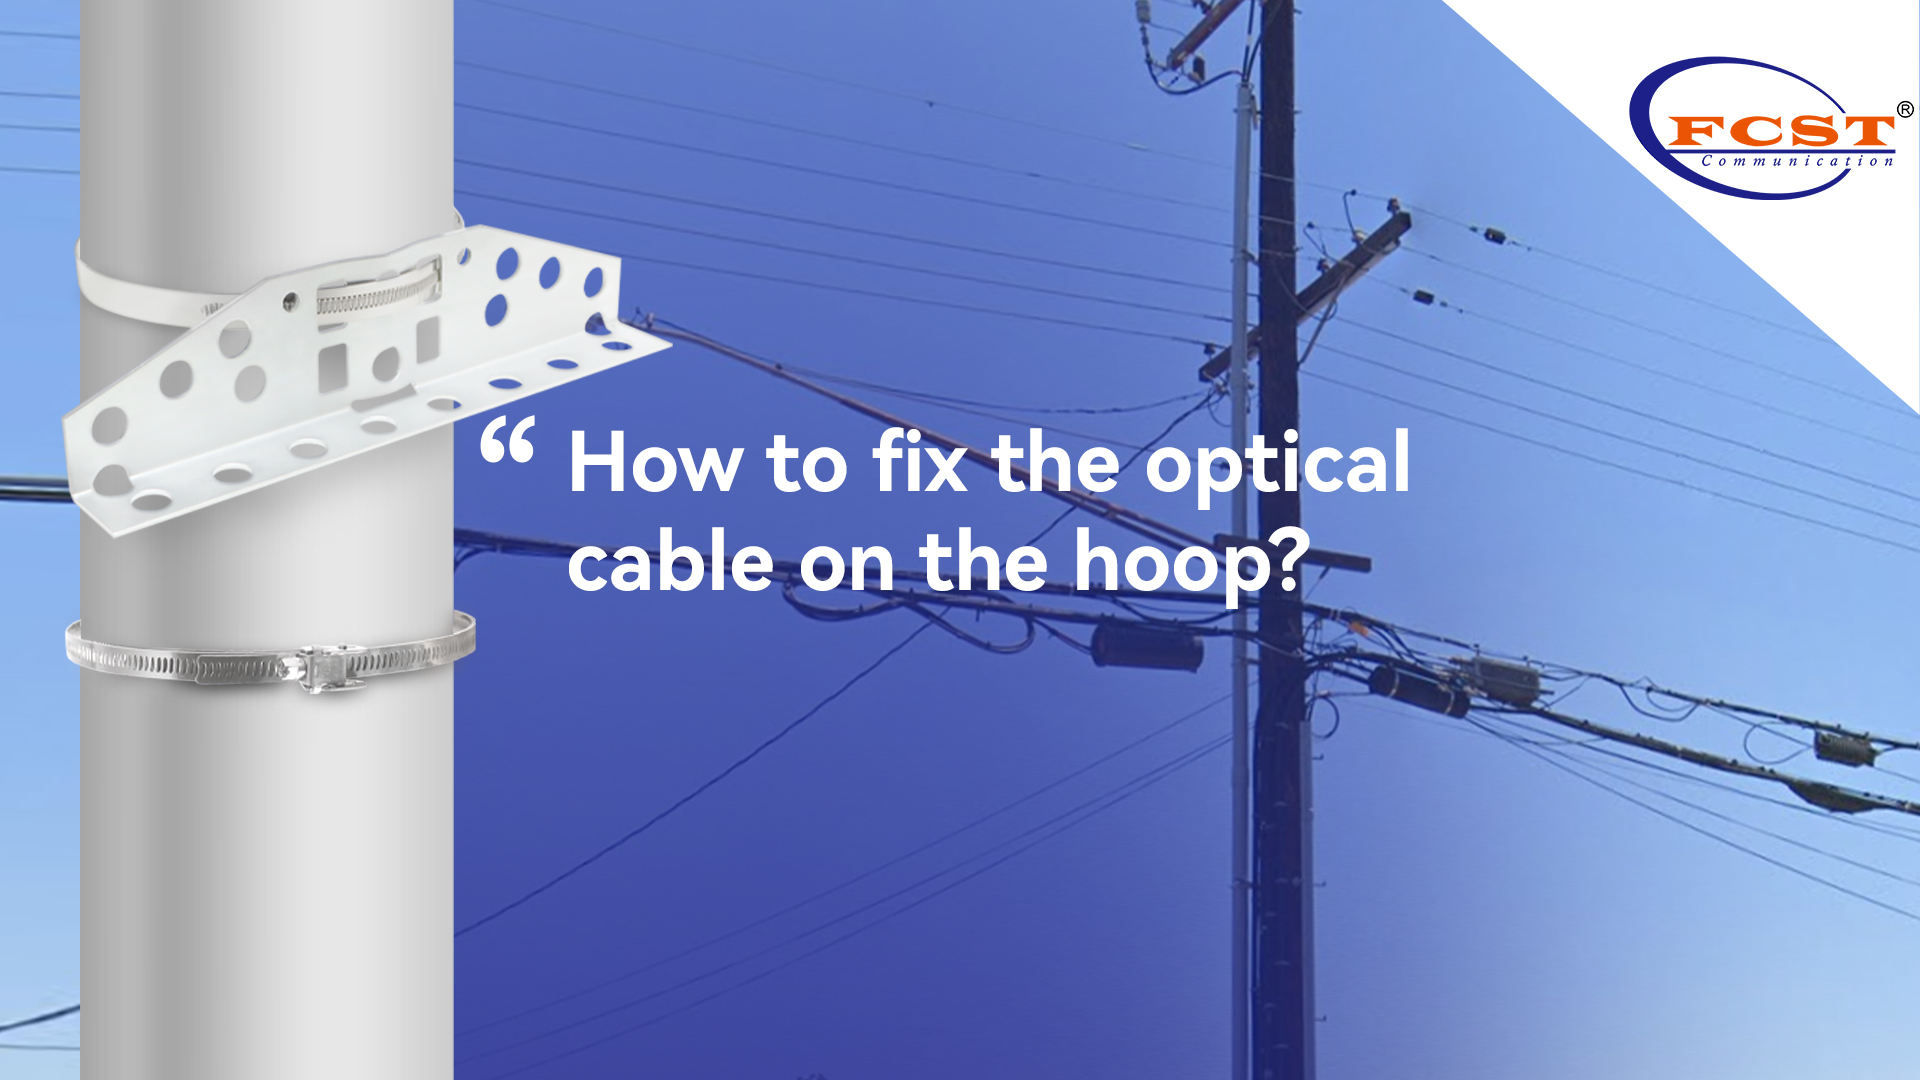 How to fix the optical cable on the hoop?